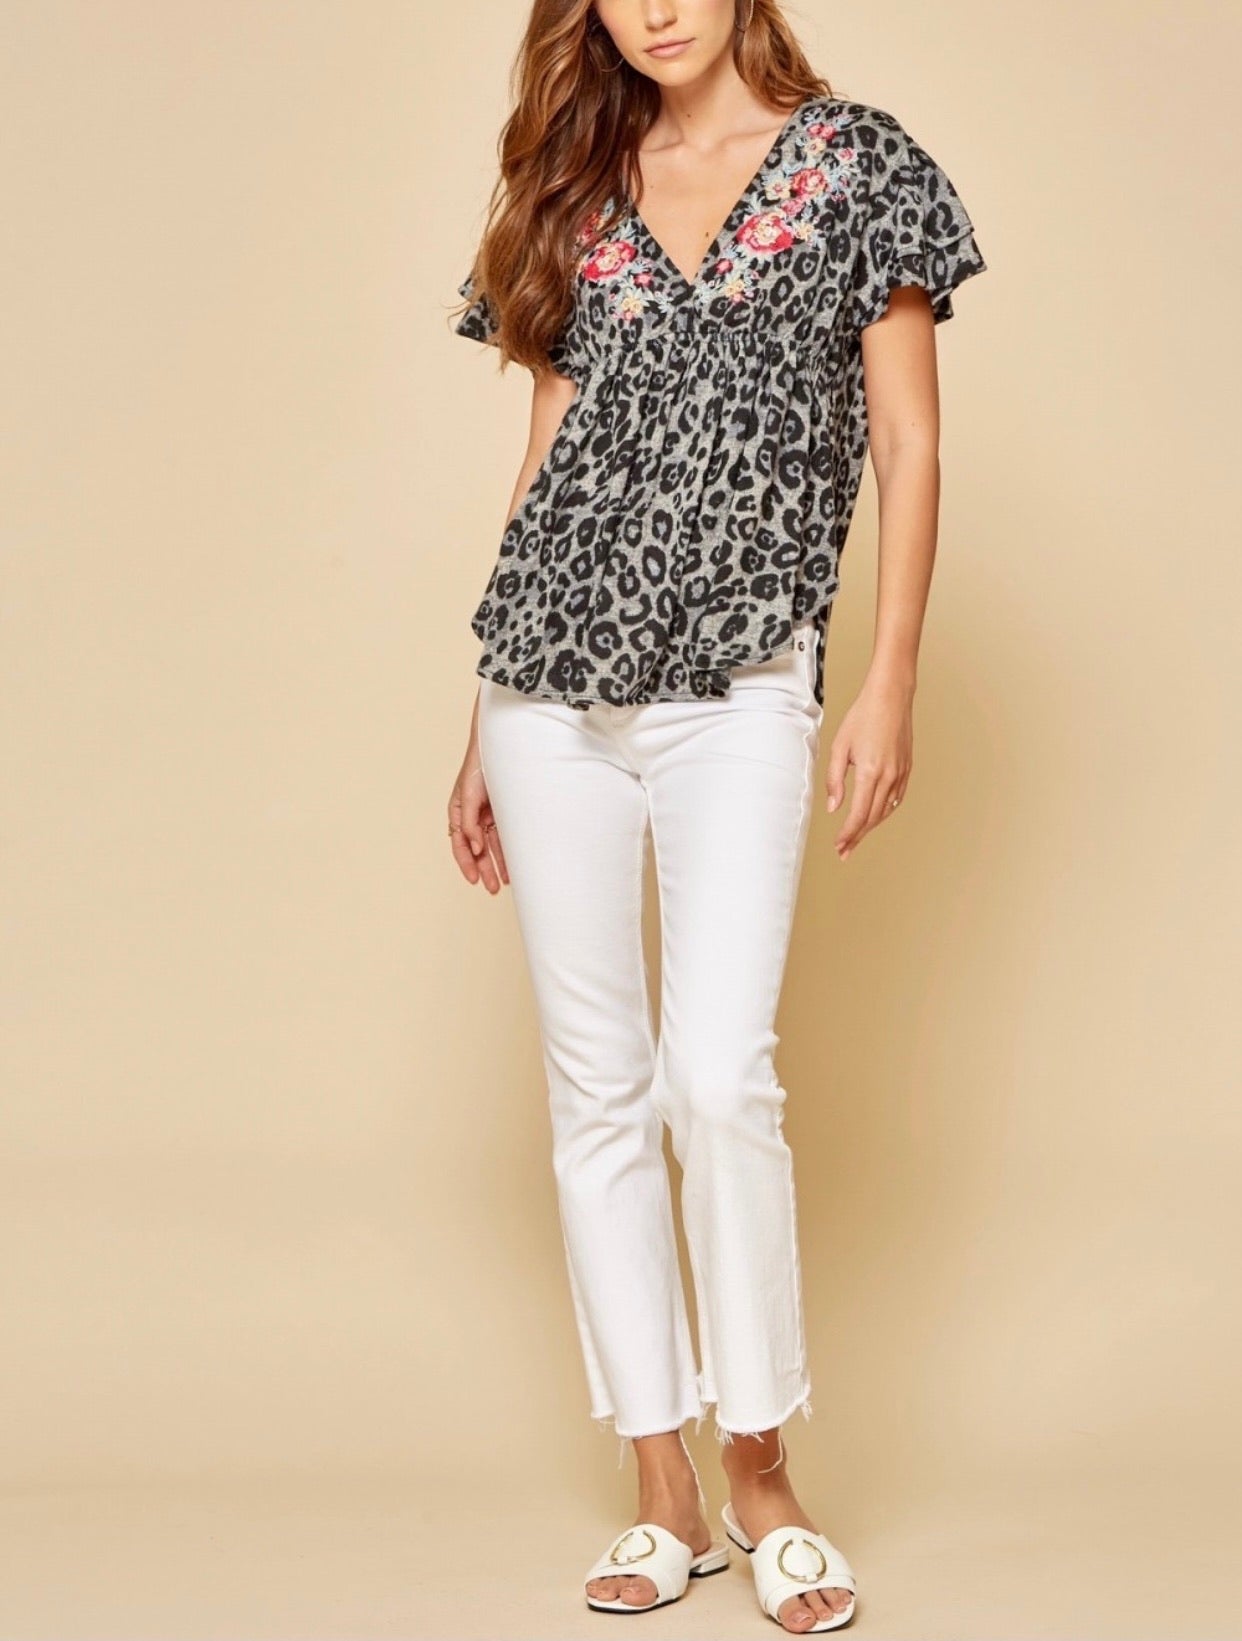 Sassy Leopard Embroidered Top